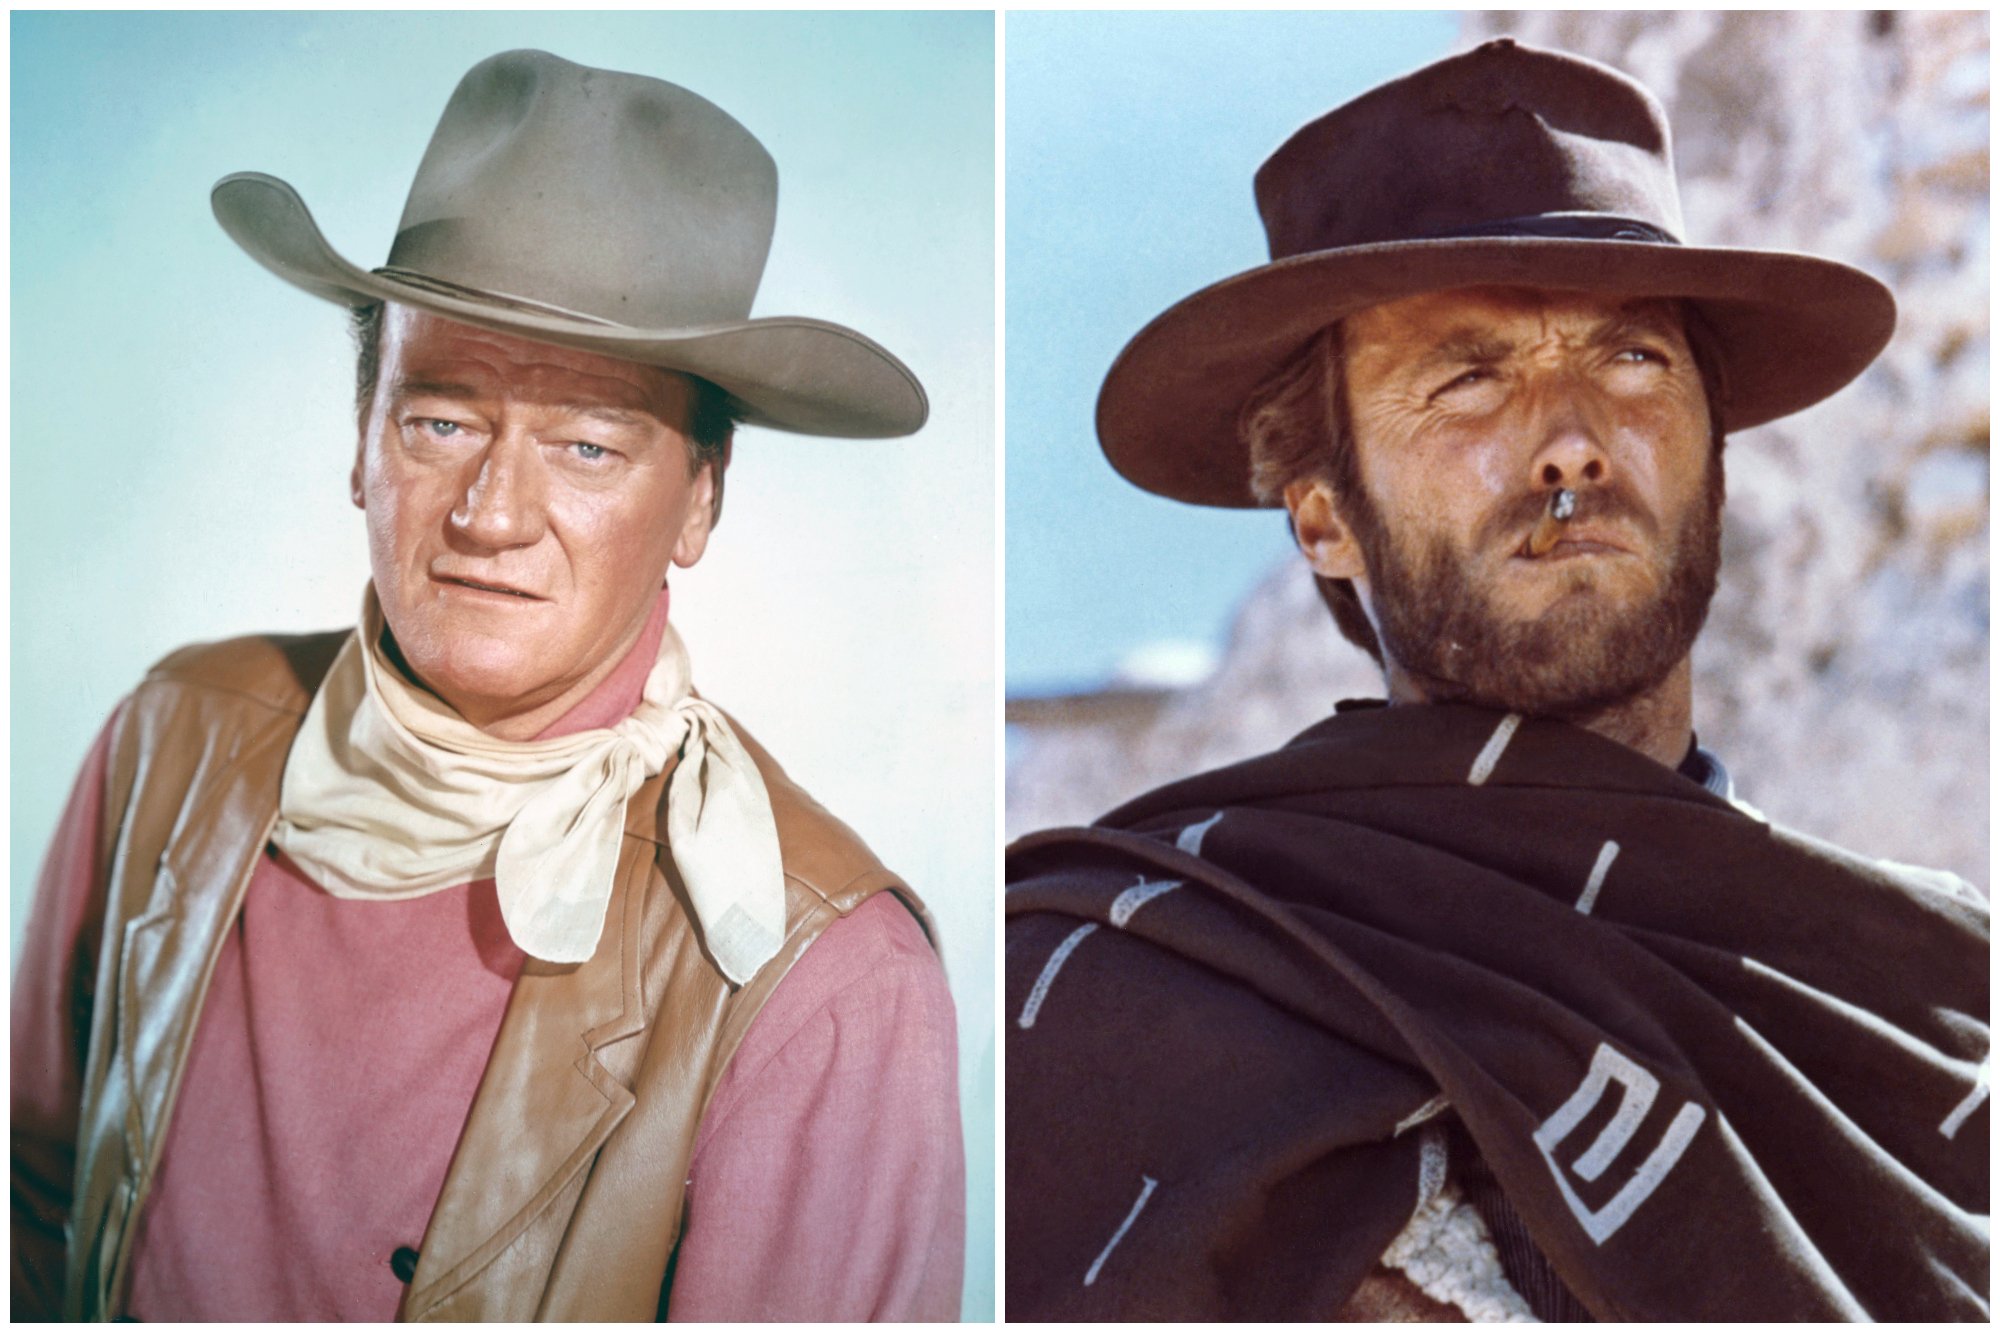 John Wayne and Clint Eastwood as Monco in 'For a Few Dollars More' wearing Western cowboy costumes in a collage